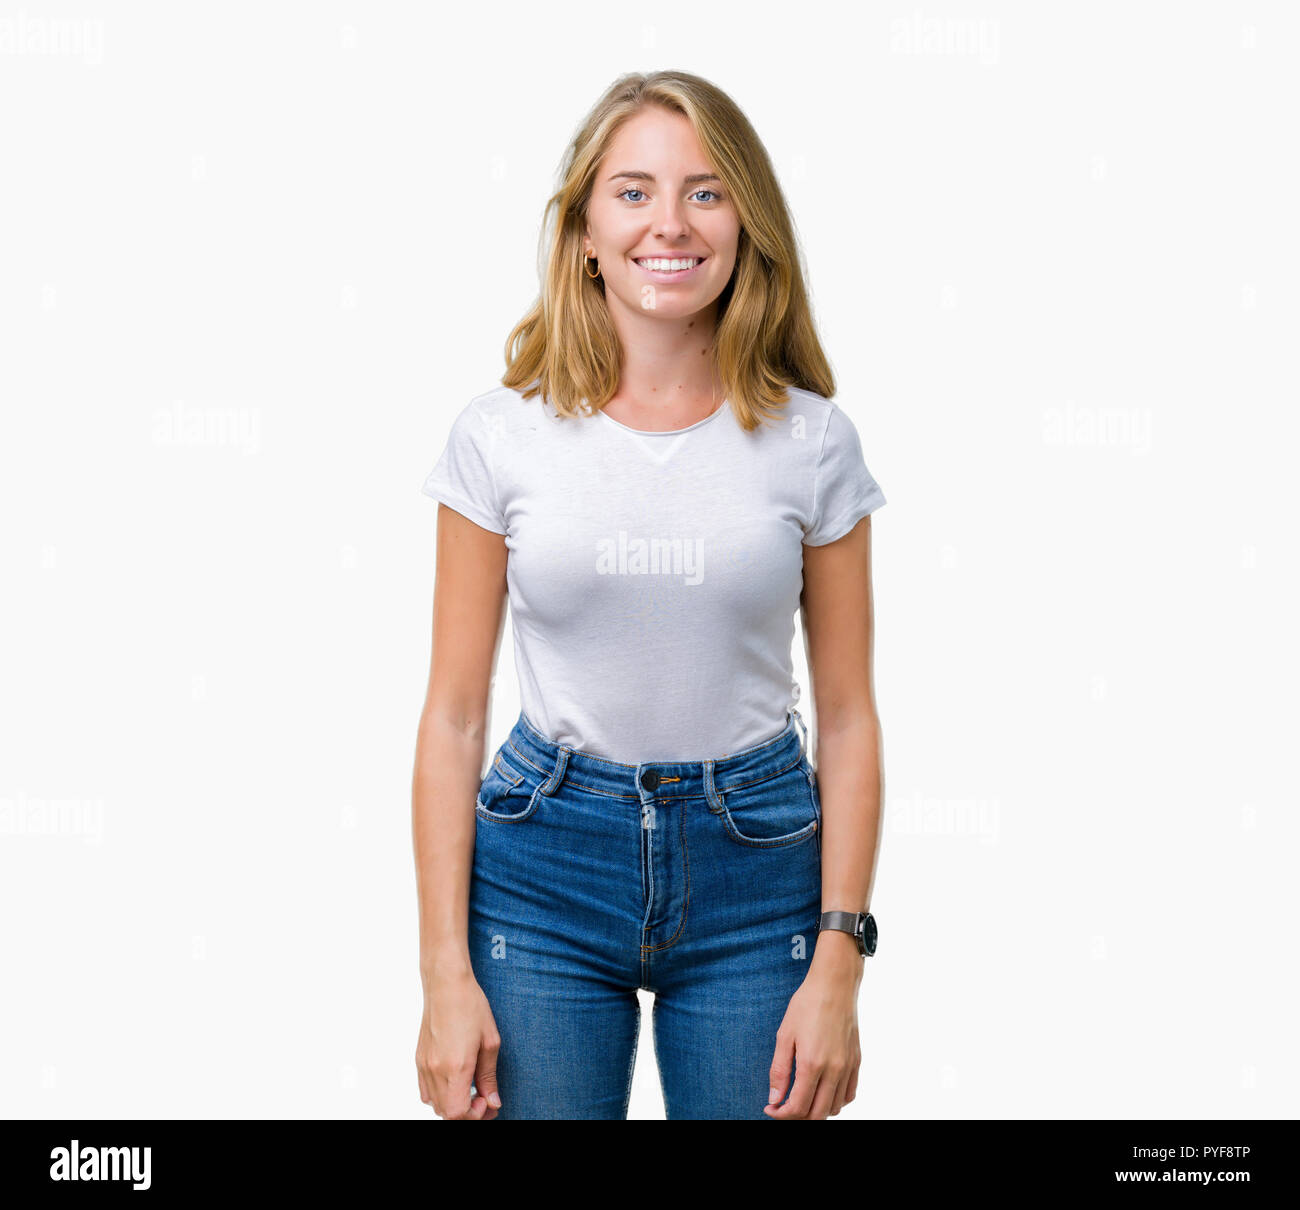 Premium Photo  Smiling positive young woman with t-shirt